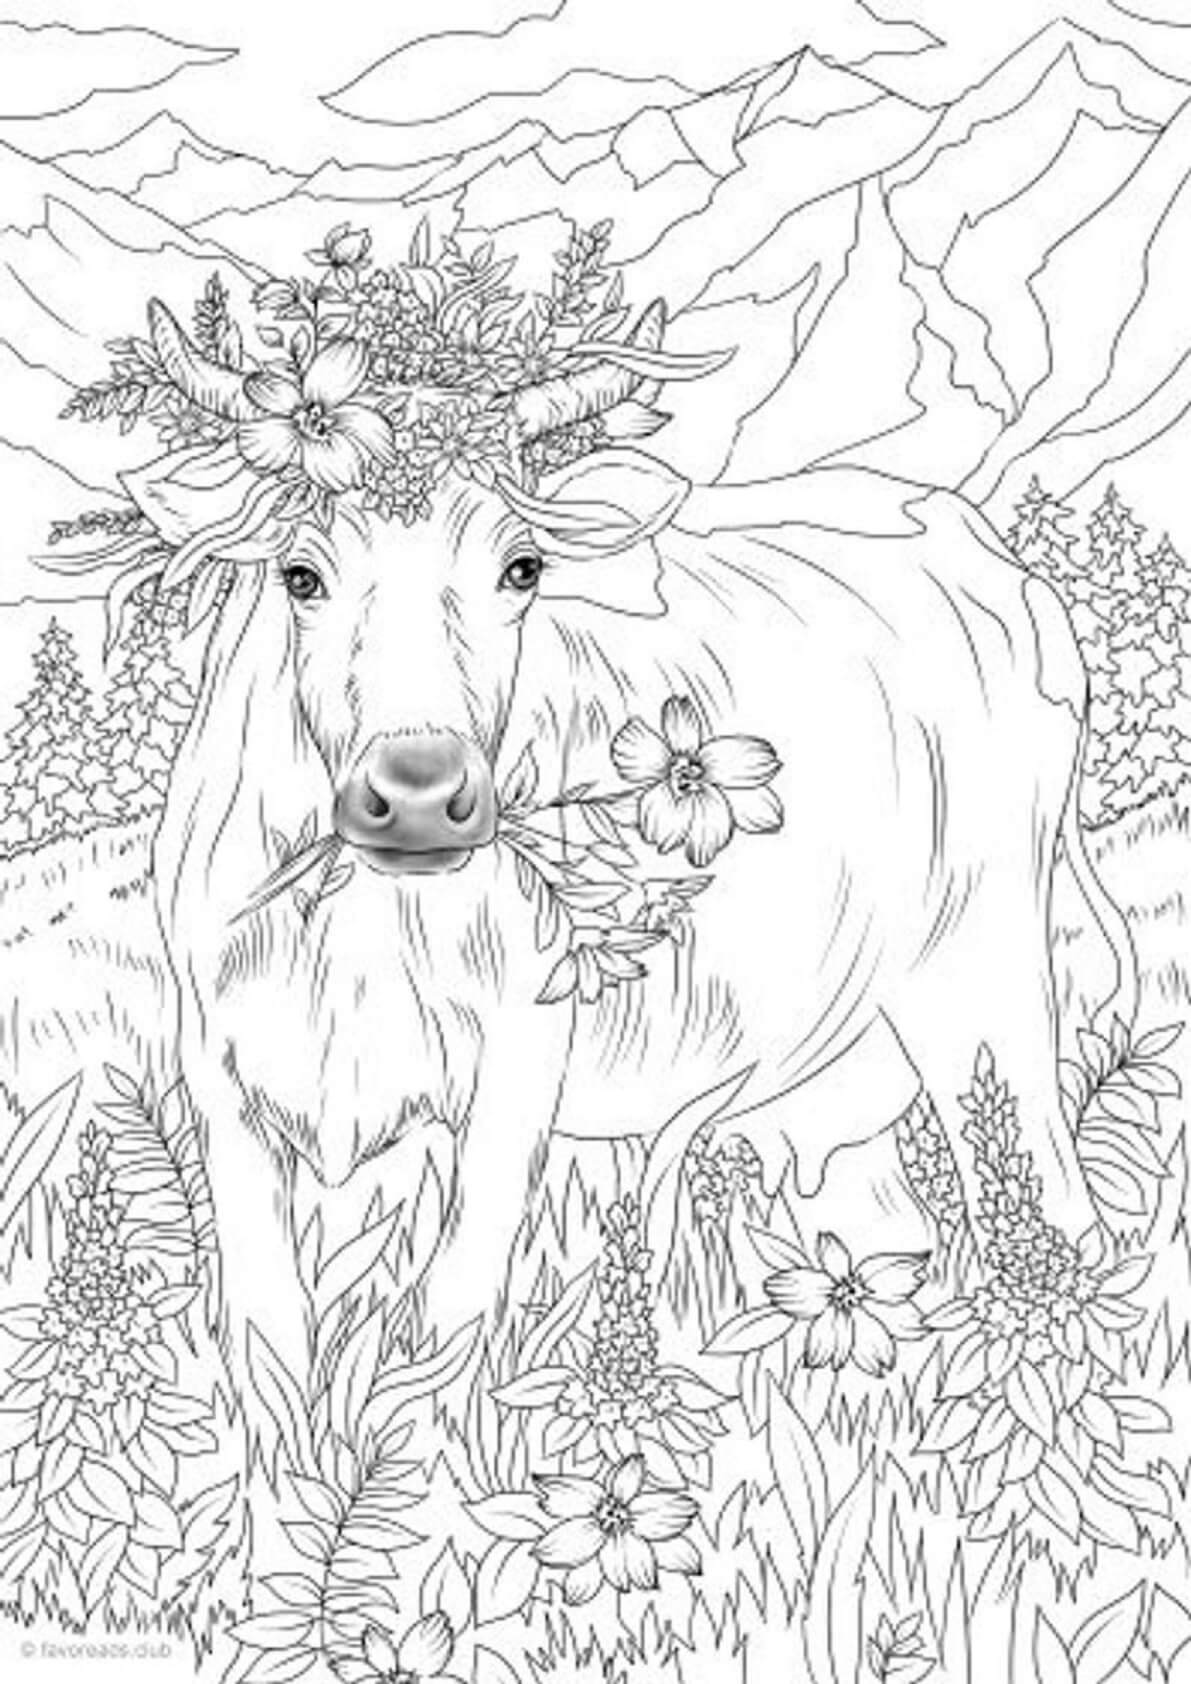 Mandala Cow With Flowers and Leaves Coloring Page Mandalas